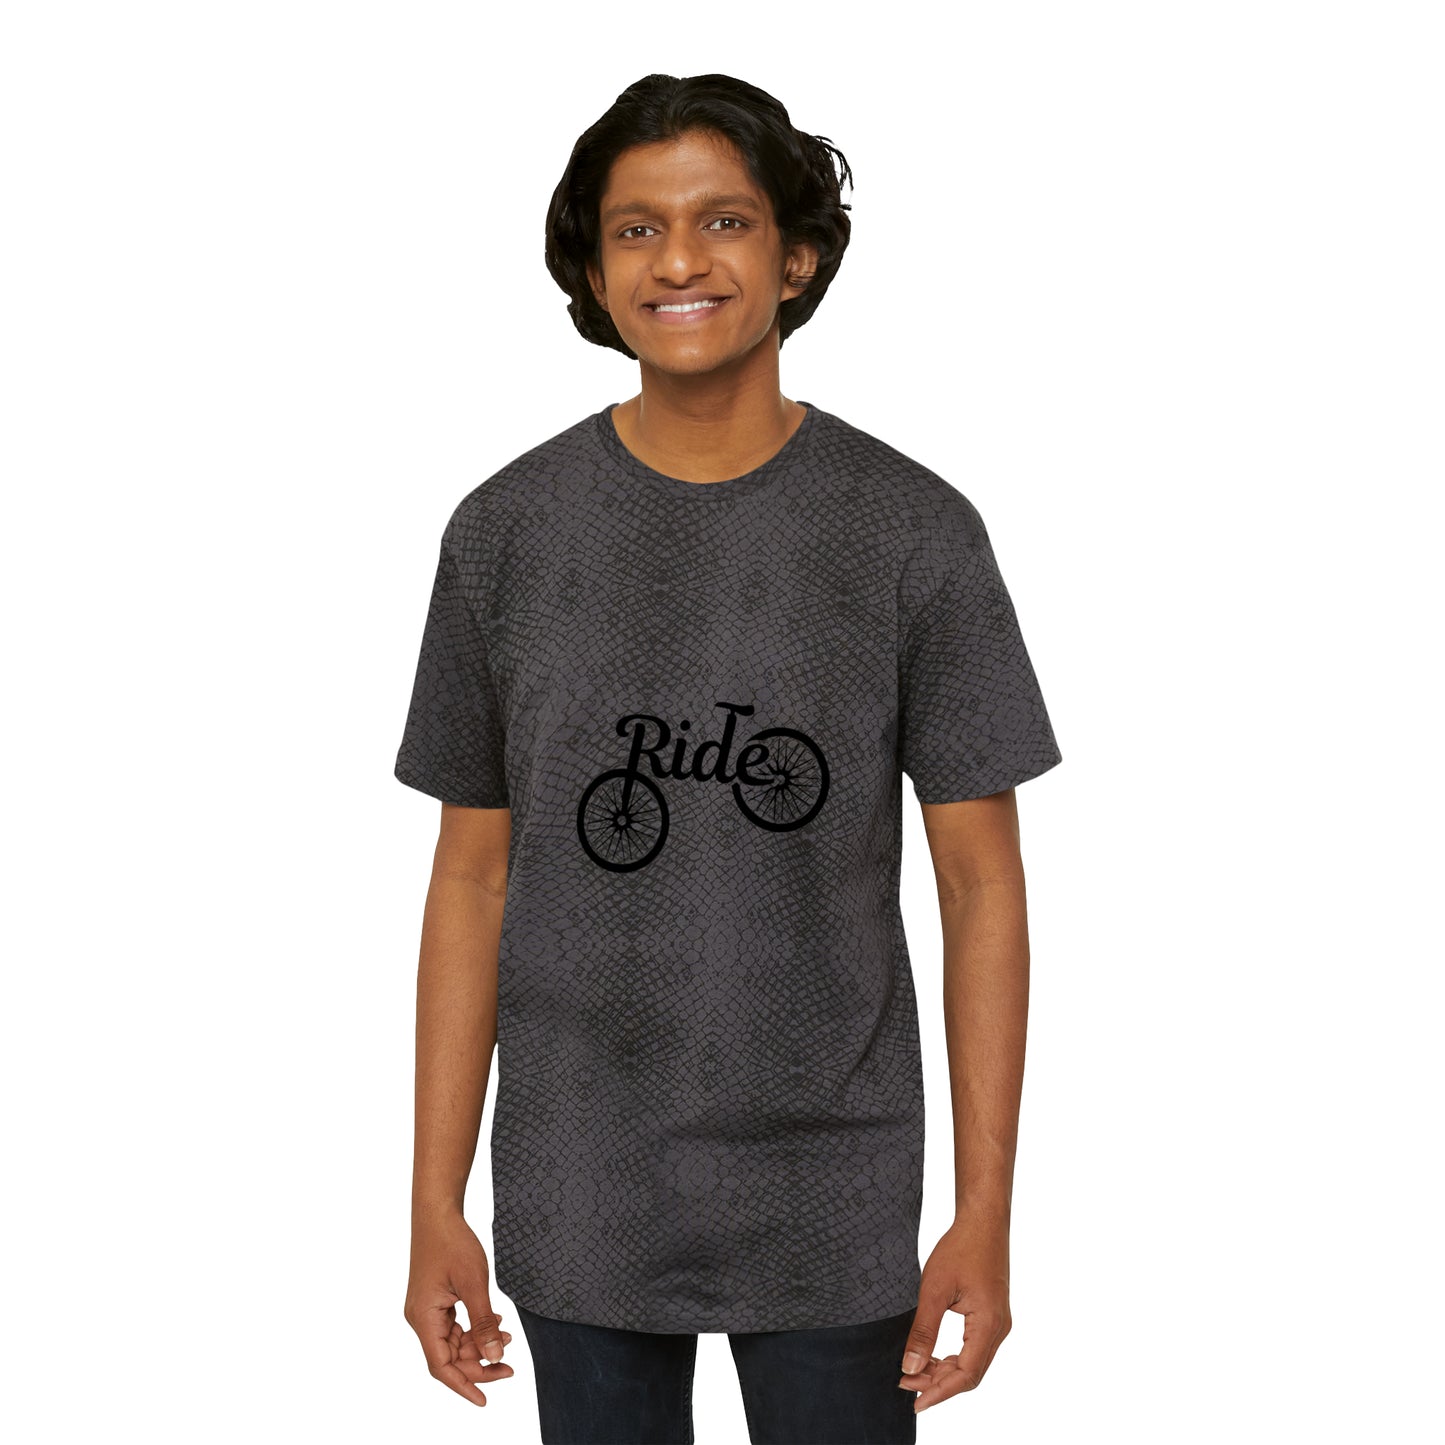 Men's Fine Ride Jersey Tee With Print Options